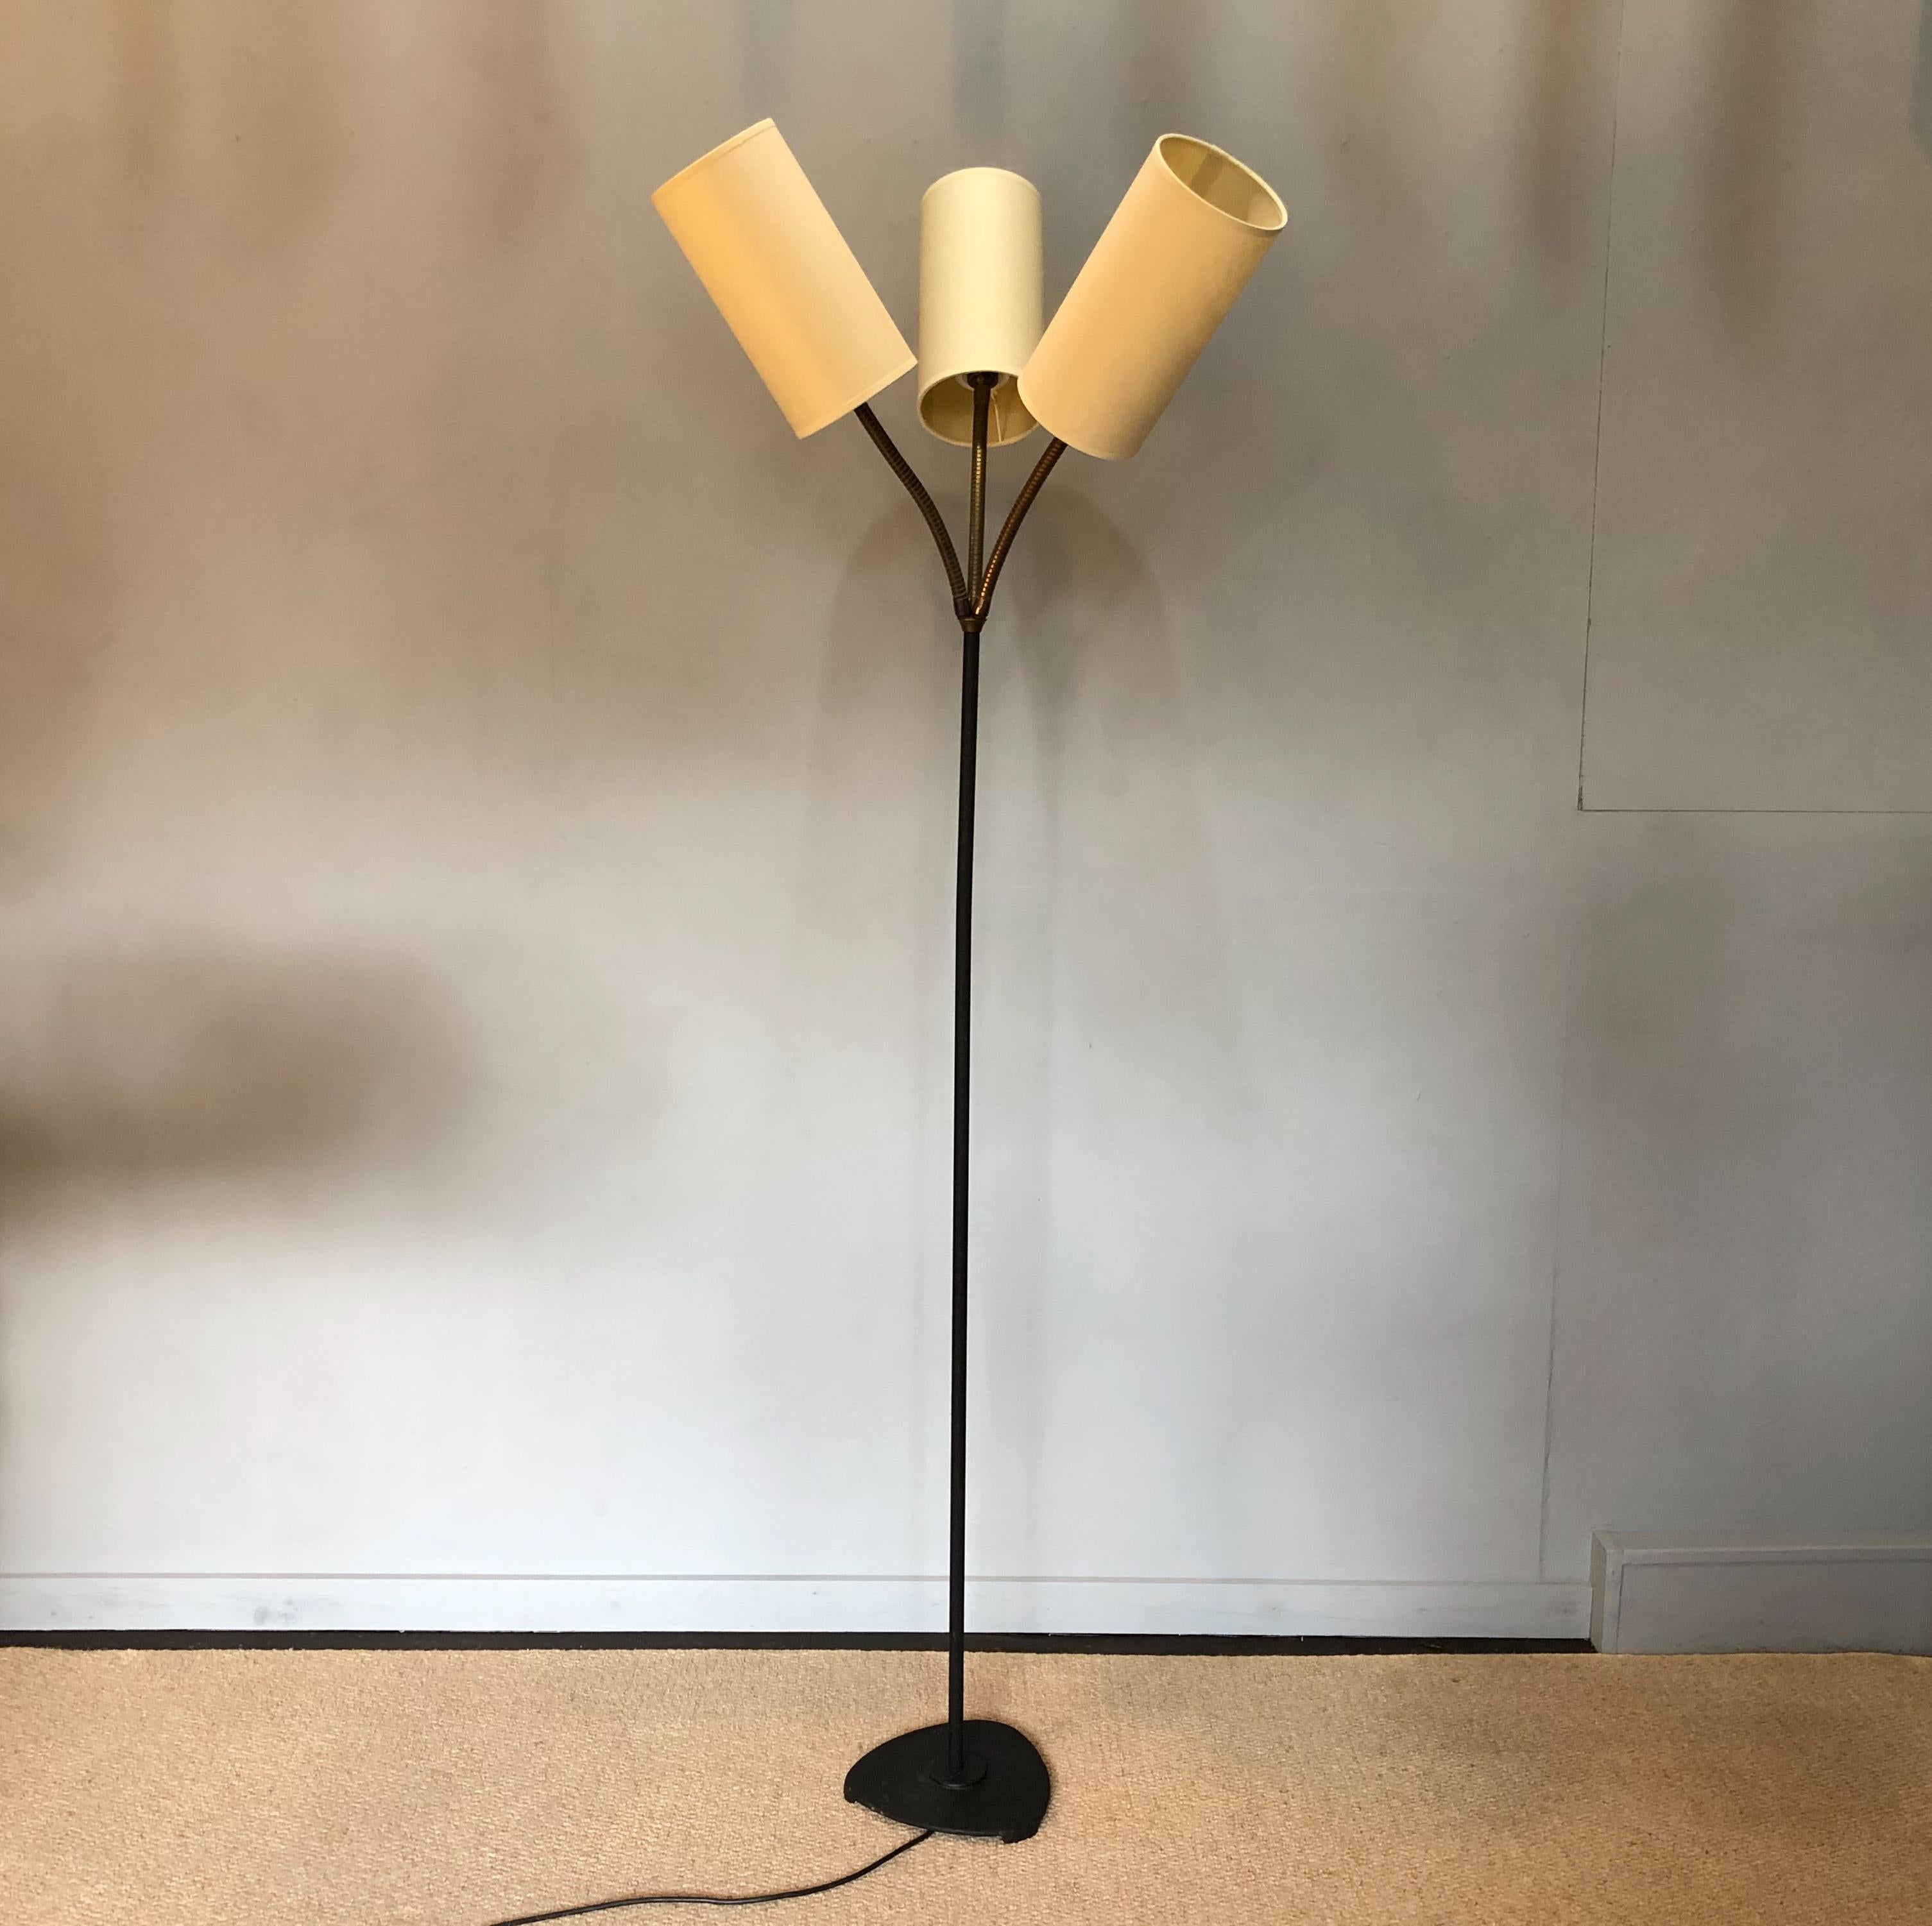 A Danish midcentury floor lamp, circa 1950. Black steel with brass triple head goose neck stems. New parchment cylinder shades. Fully rewired.